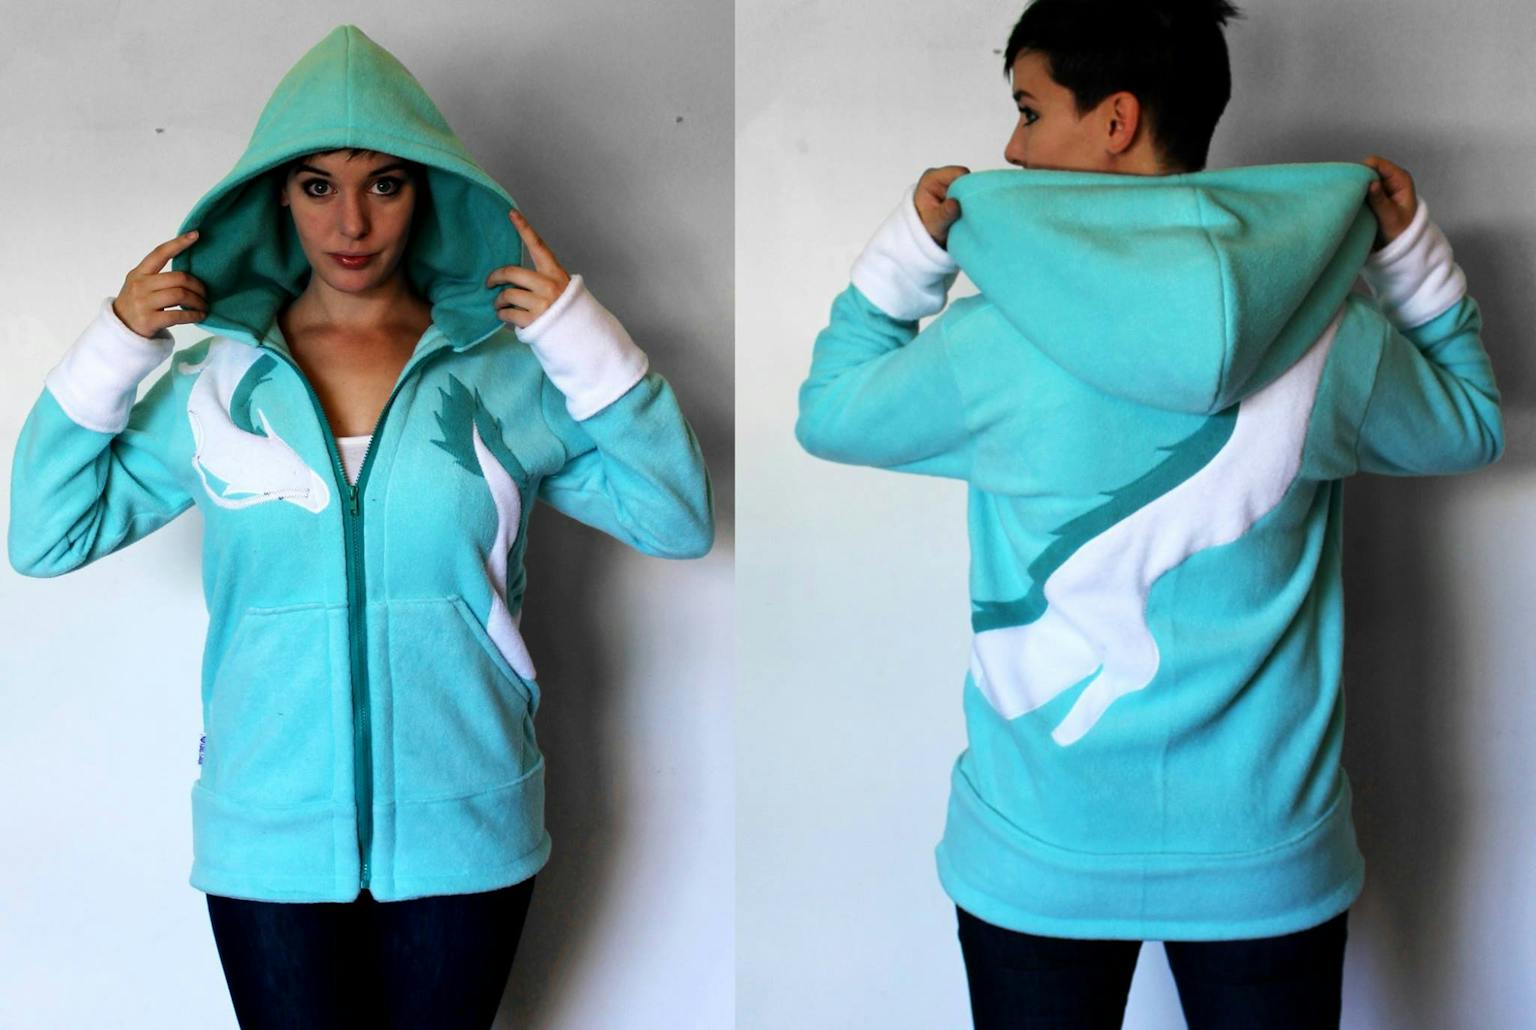 Embrace your inner Totoro with this new line of costume hoodies